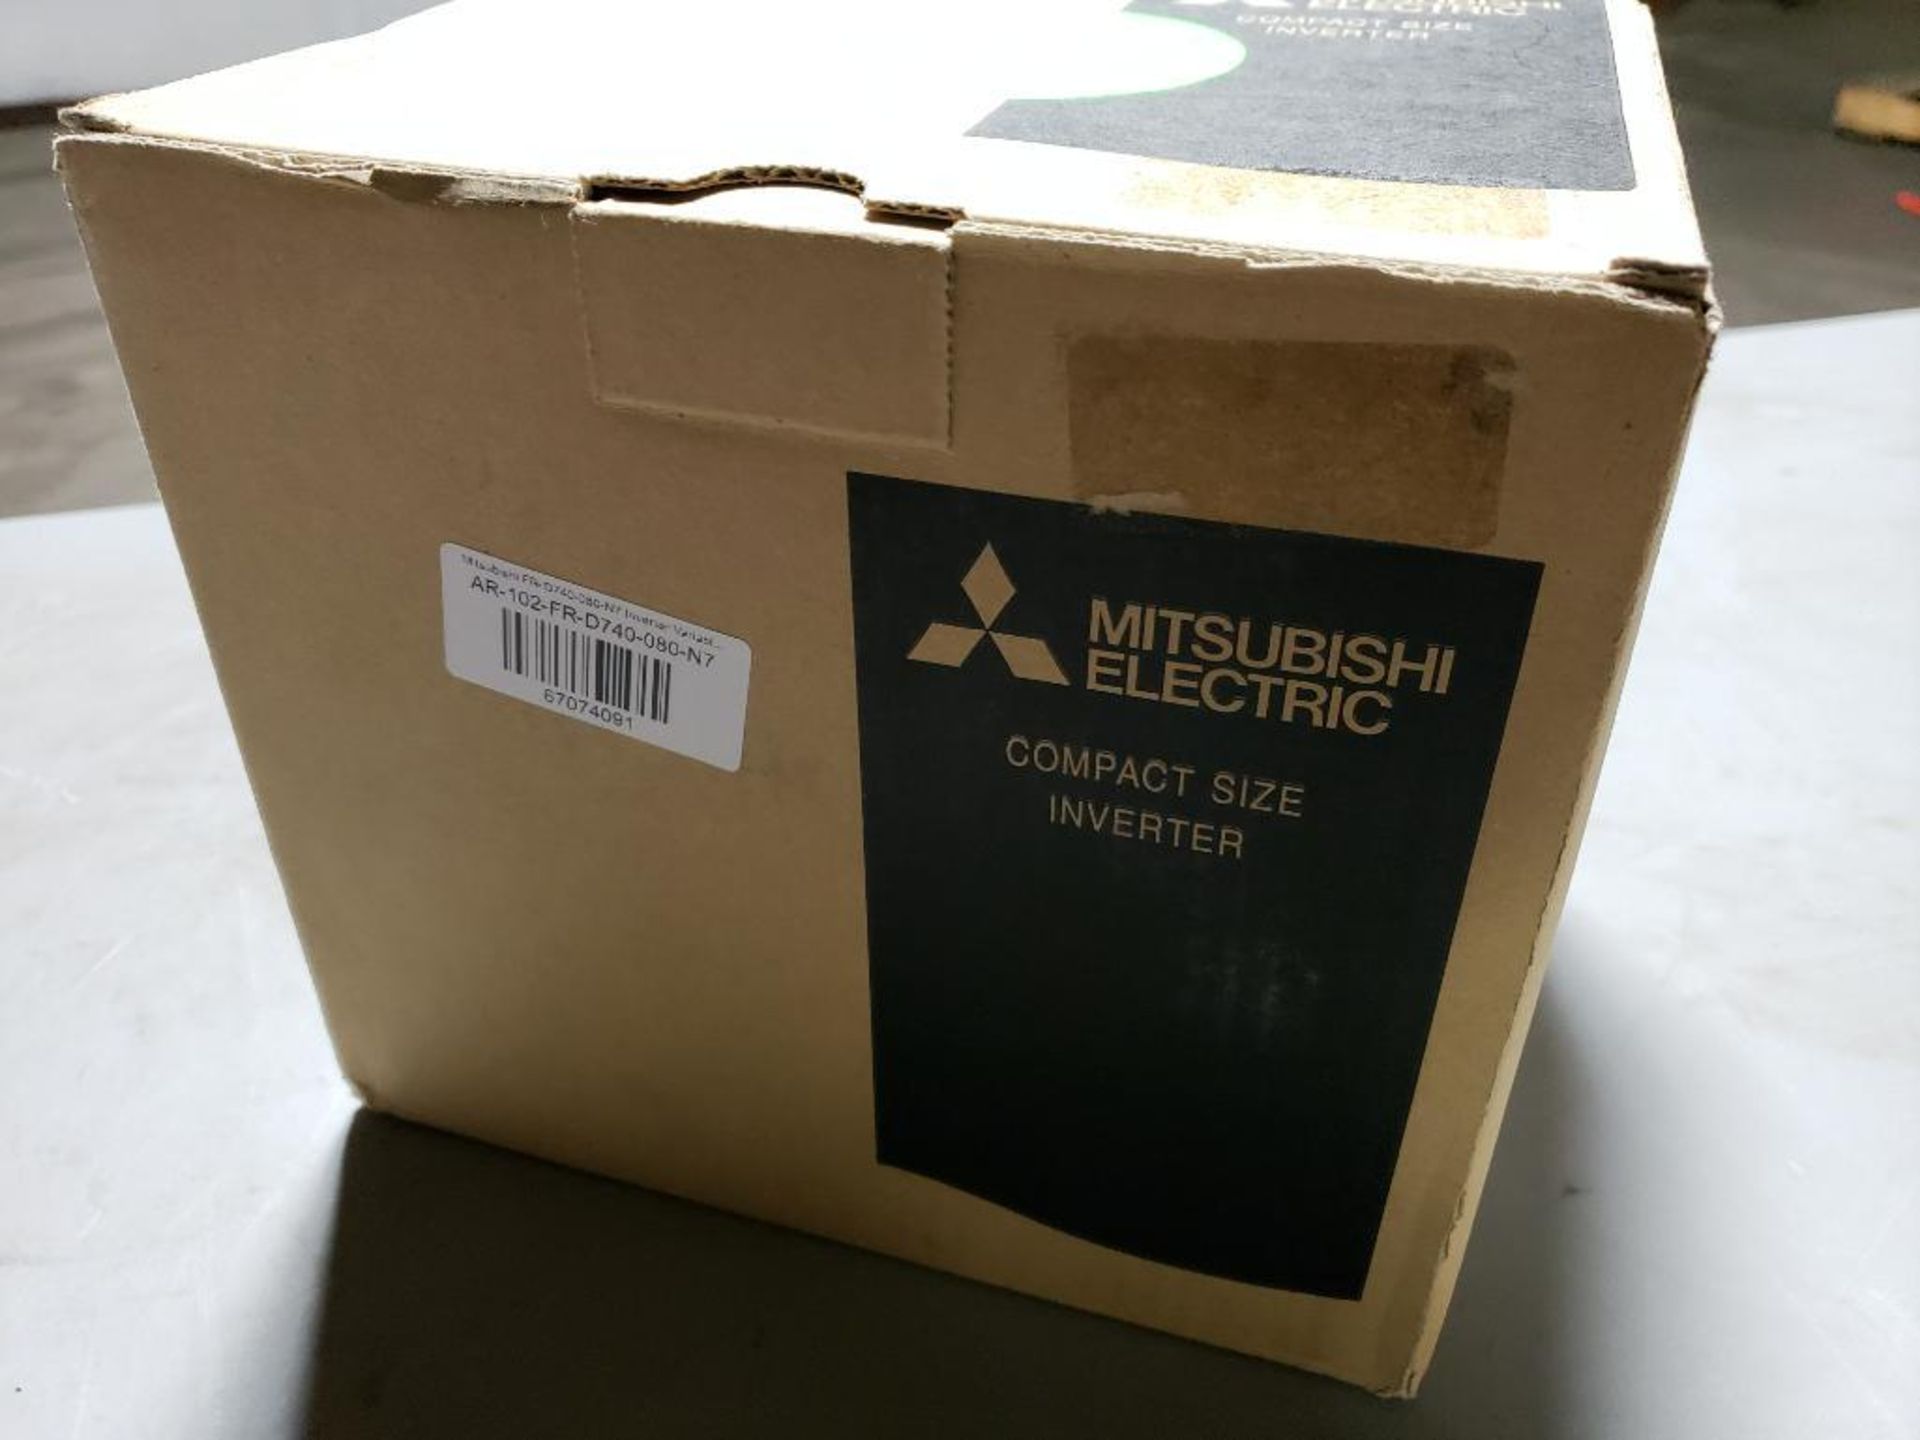 Mitsubishi inverter drive. Part number FR-D740-080-N7. New in box. - Image 4 of 4